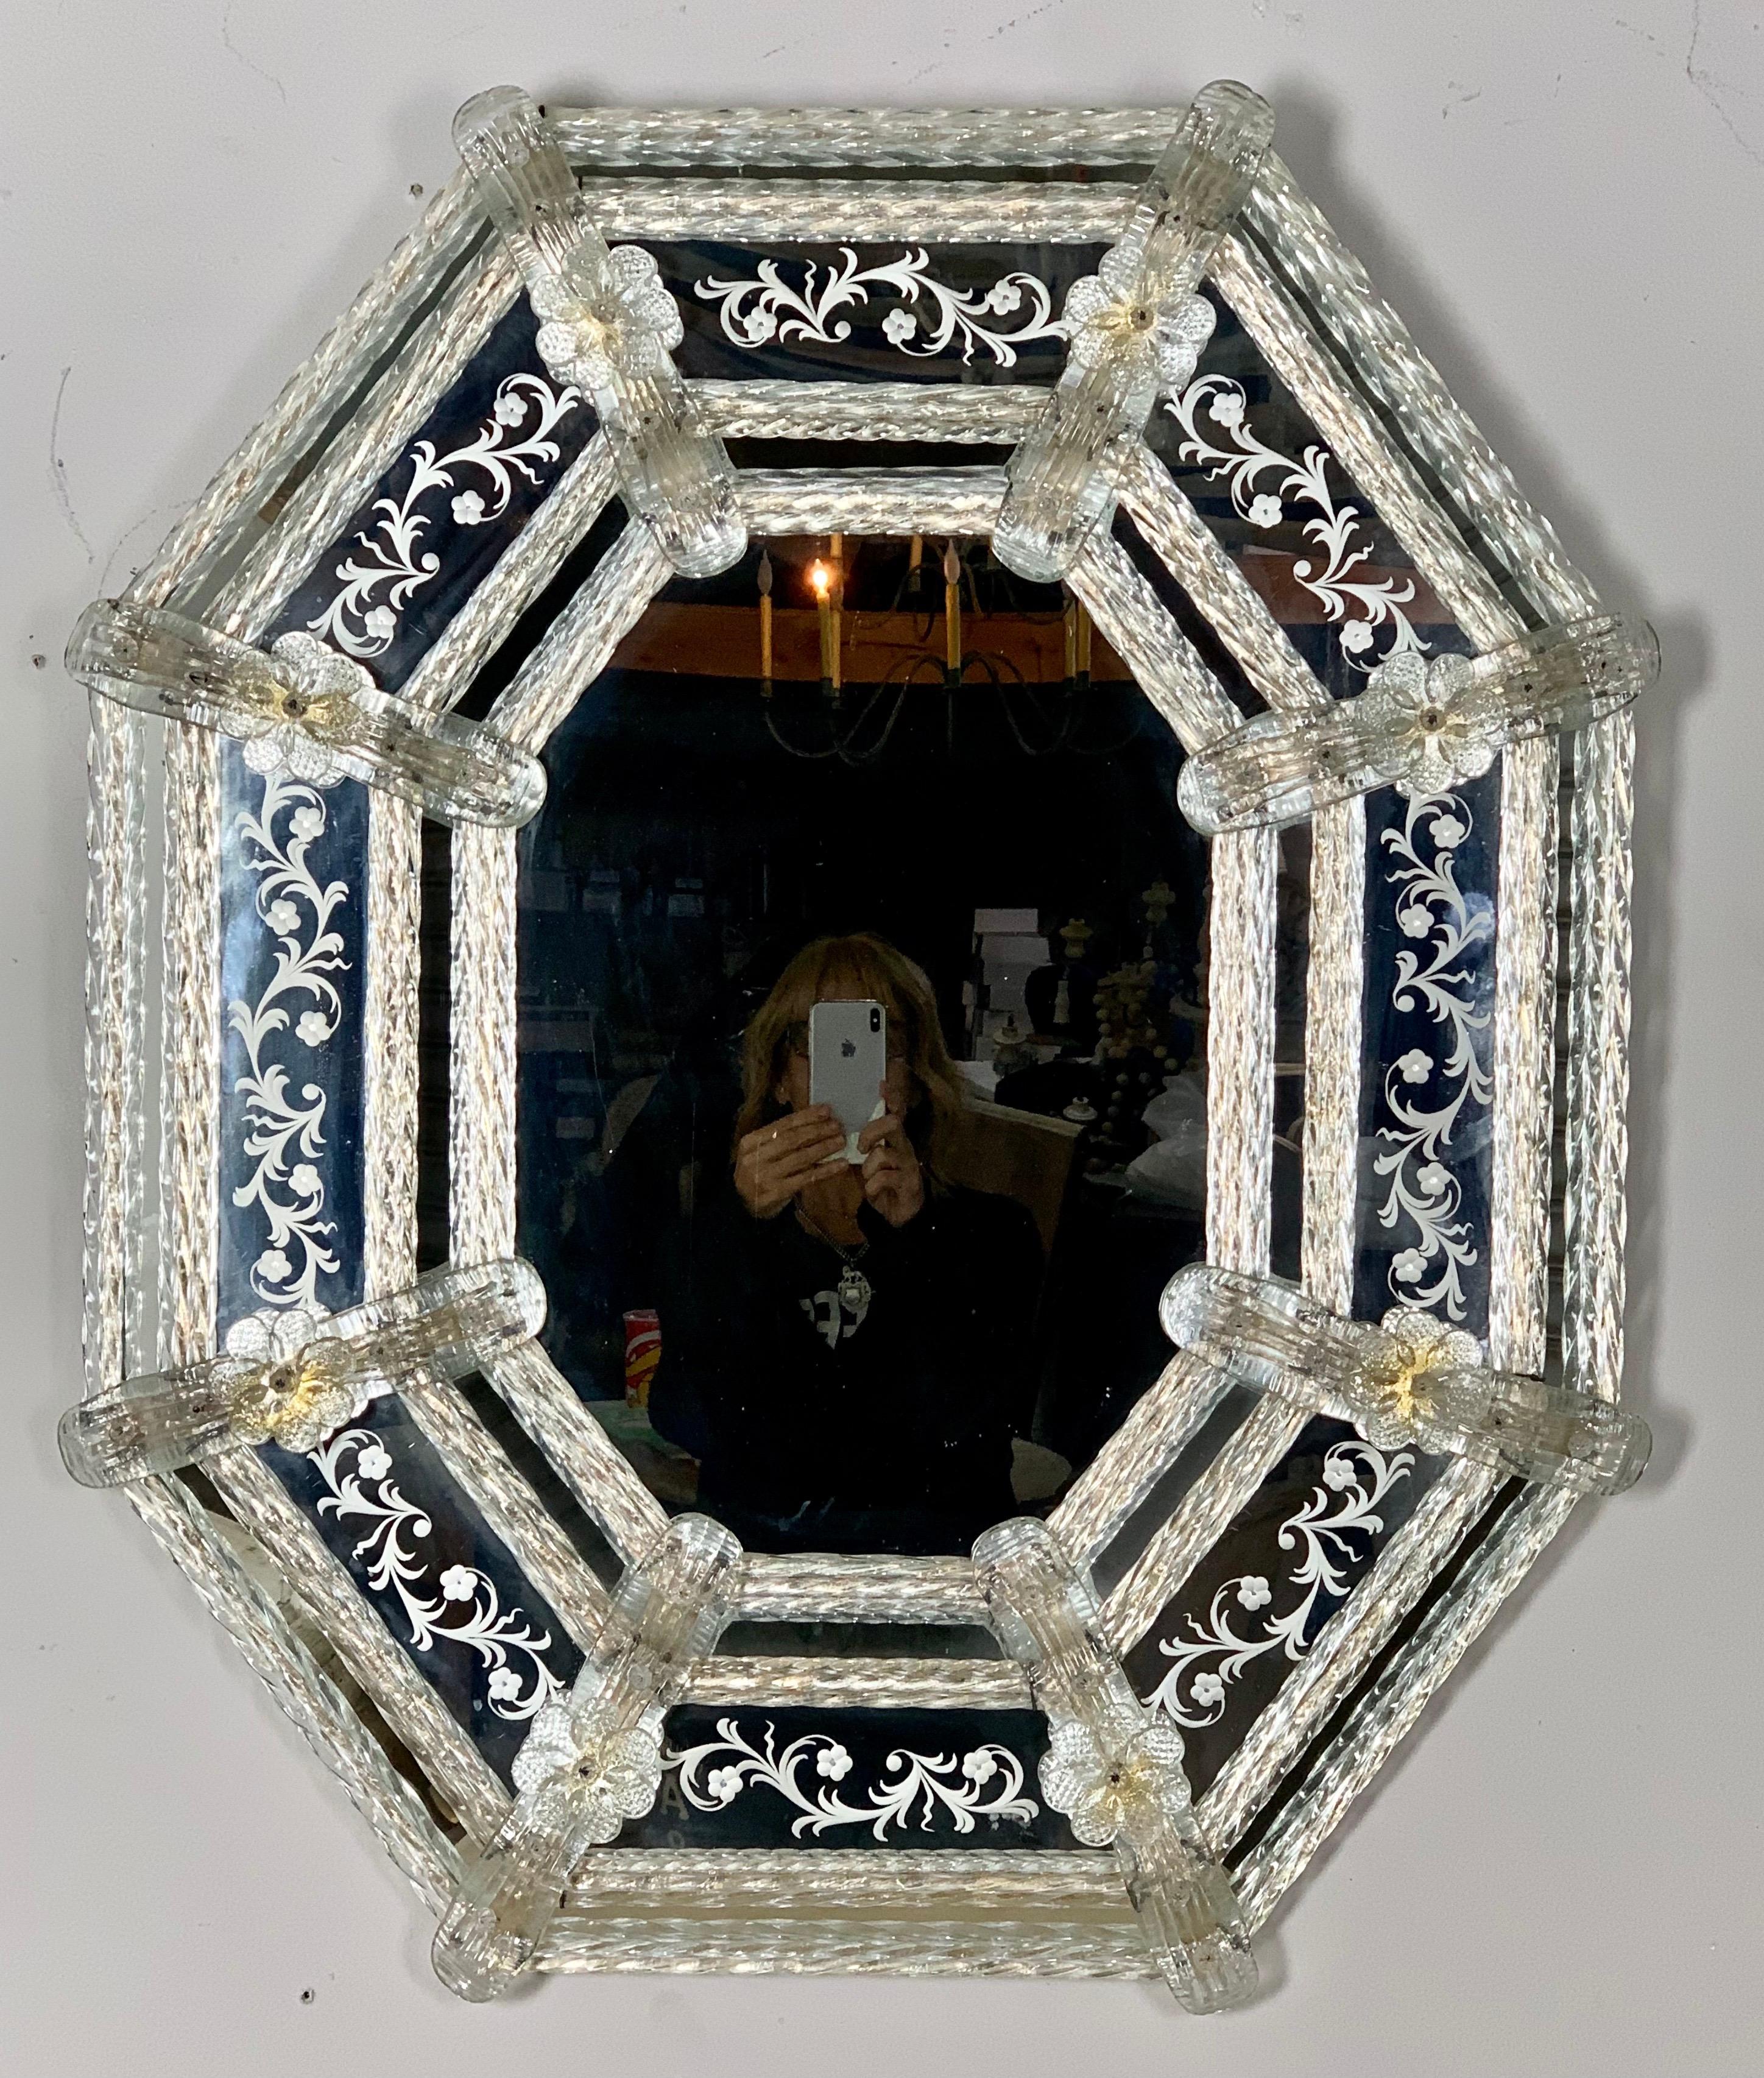 Octagonal shaped Venetian etched mirror made in Venetian glass and detailed with hand blown flowers, leaves, and so much more. There are gold flecks remaining on some of the flowers.